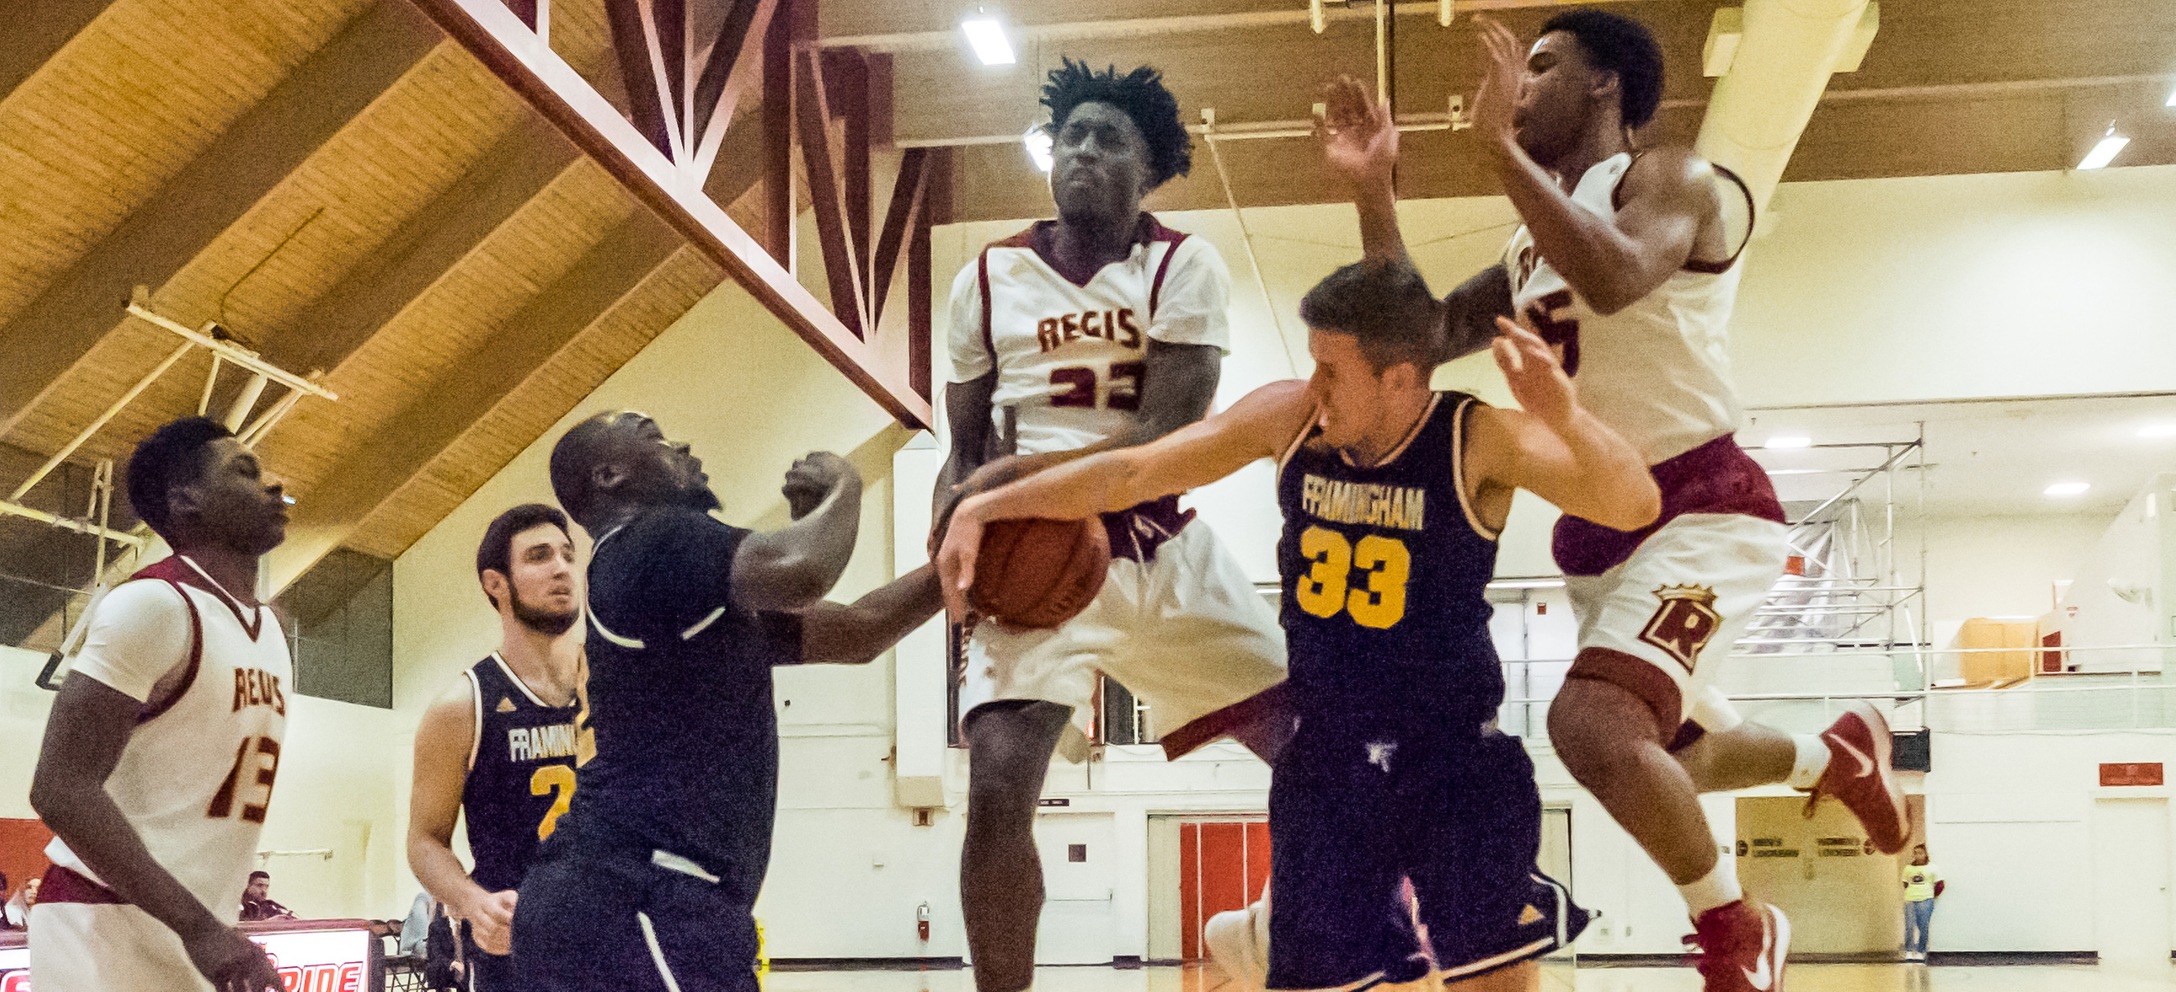 Men's Basketball Closes Season With Loss To Lasell In GNAC Quarterfinal